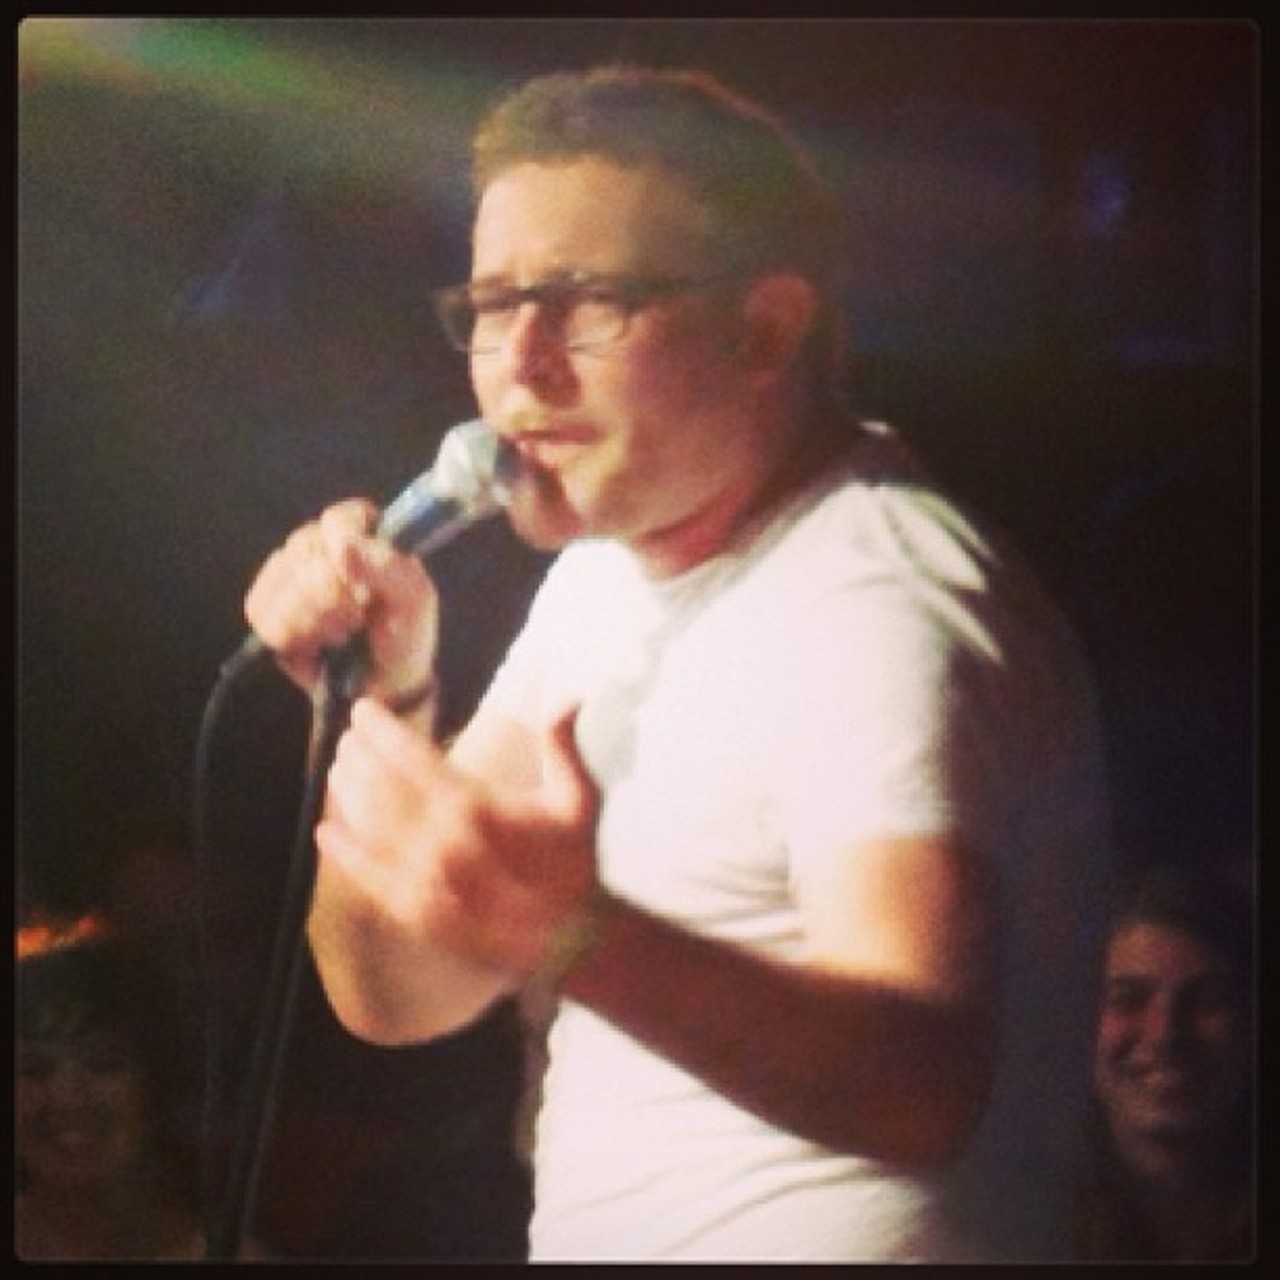 The energetic and hilarious James Adomian hits the intimate Grog Shop stage tonight. Famous for his many impressions and controversial views on current events, he's also very open about his sexuality and makes it known in many of his shows. Adomian originates from Los Angeles and often makes light of the differences between SoCal and his current home, New York. The show starts tonight at 7:30. Tickets are $15. (Hammond)